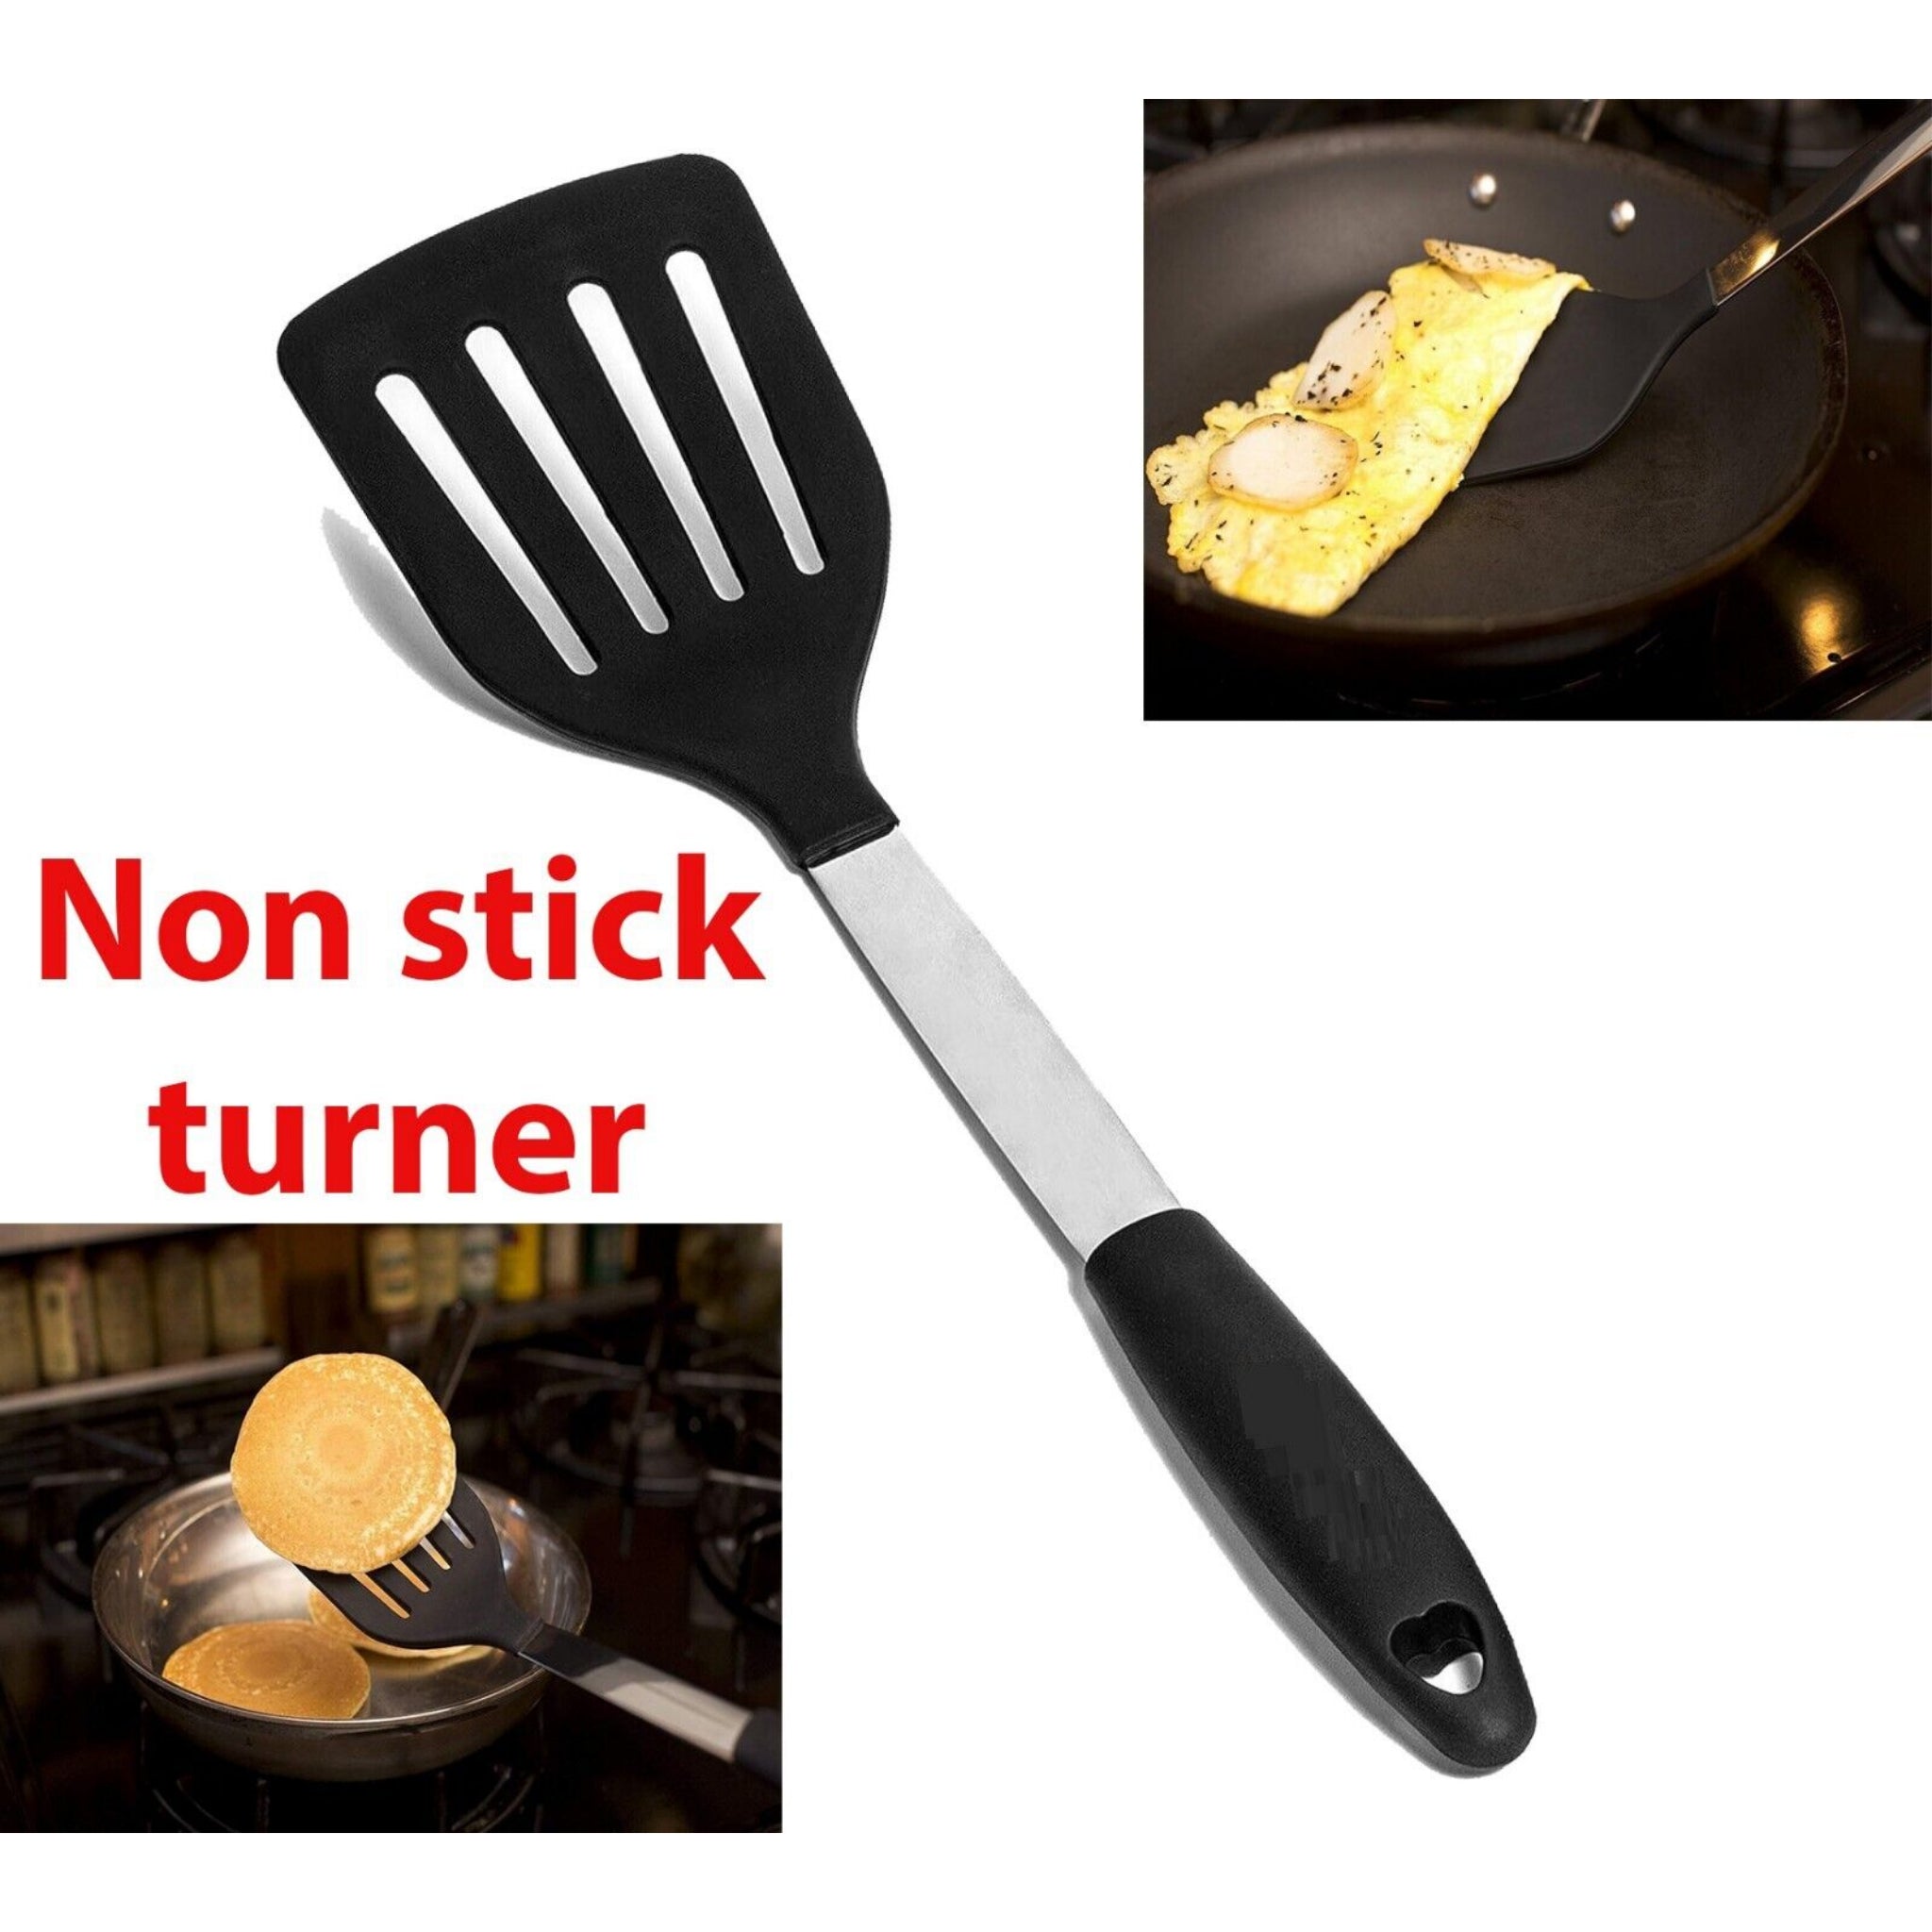 Beclen Harp 32cm Nylon Non Stick Solid And Slotted Turner/Flipper Heat  Resistant Spatula-Perfect Kitchen/Cooking Companion Tool, Slotted Turner  Spatula Heat Resistant Flipper Cooking Tool Nylon Material Premium Quality  Steel Core Ergonomic Handle